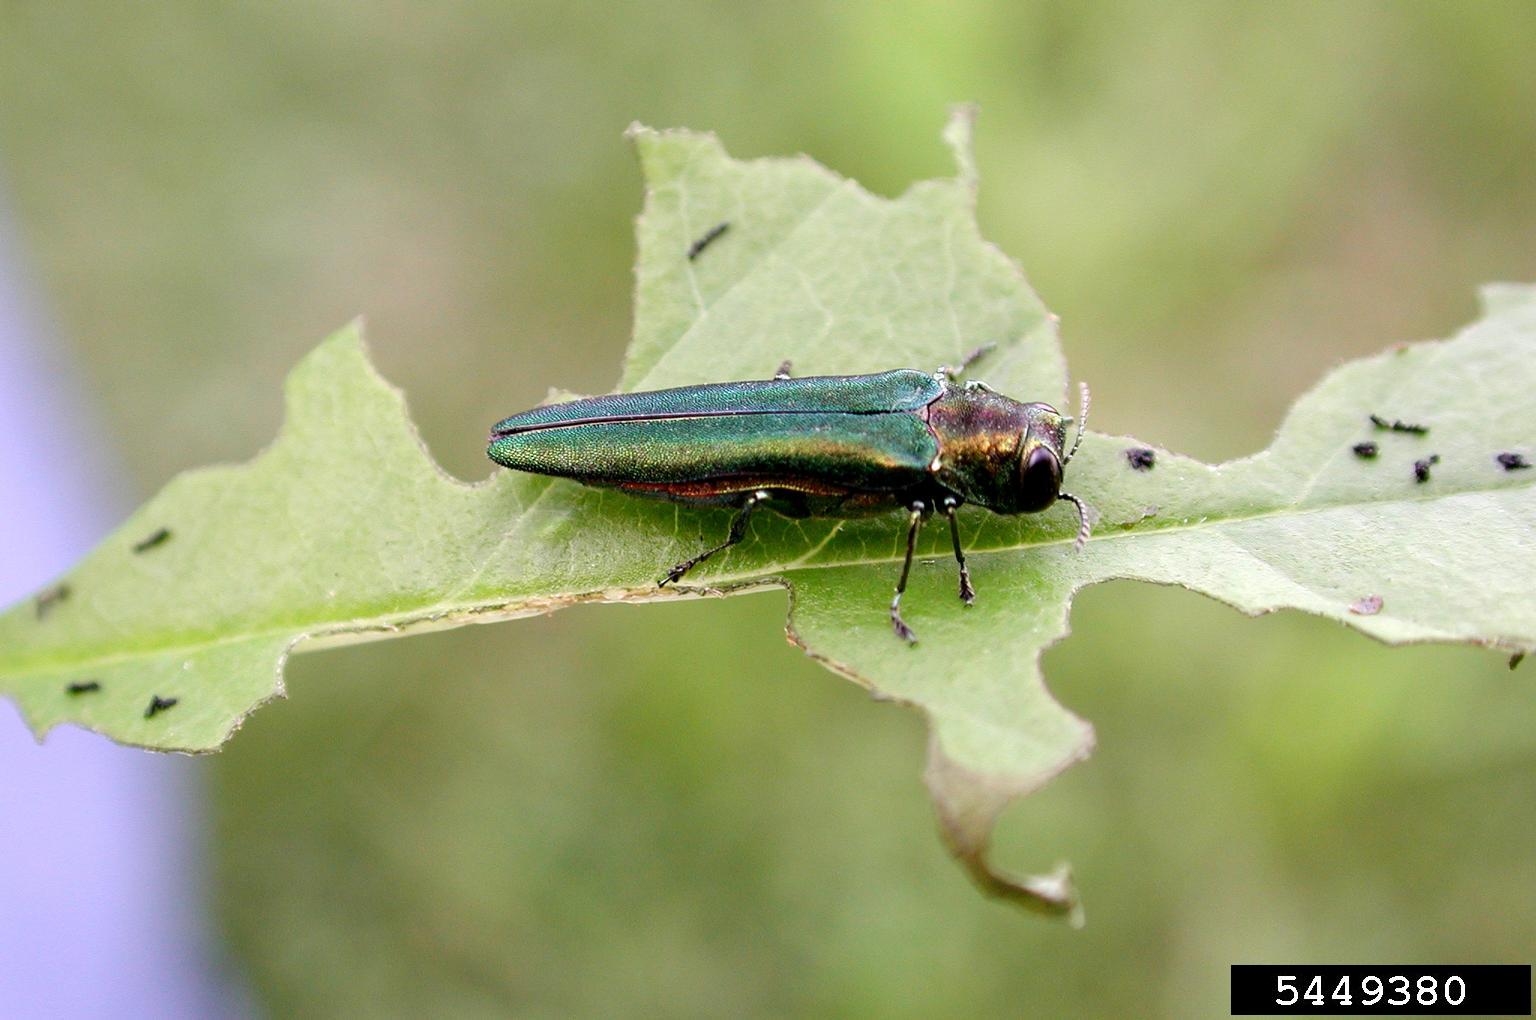 Green elongated beetle (Emerald Ash Borer) on leaf that has been eaten by beetle.